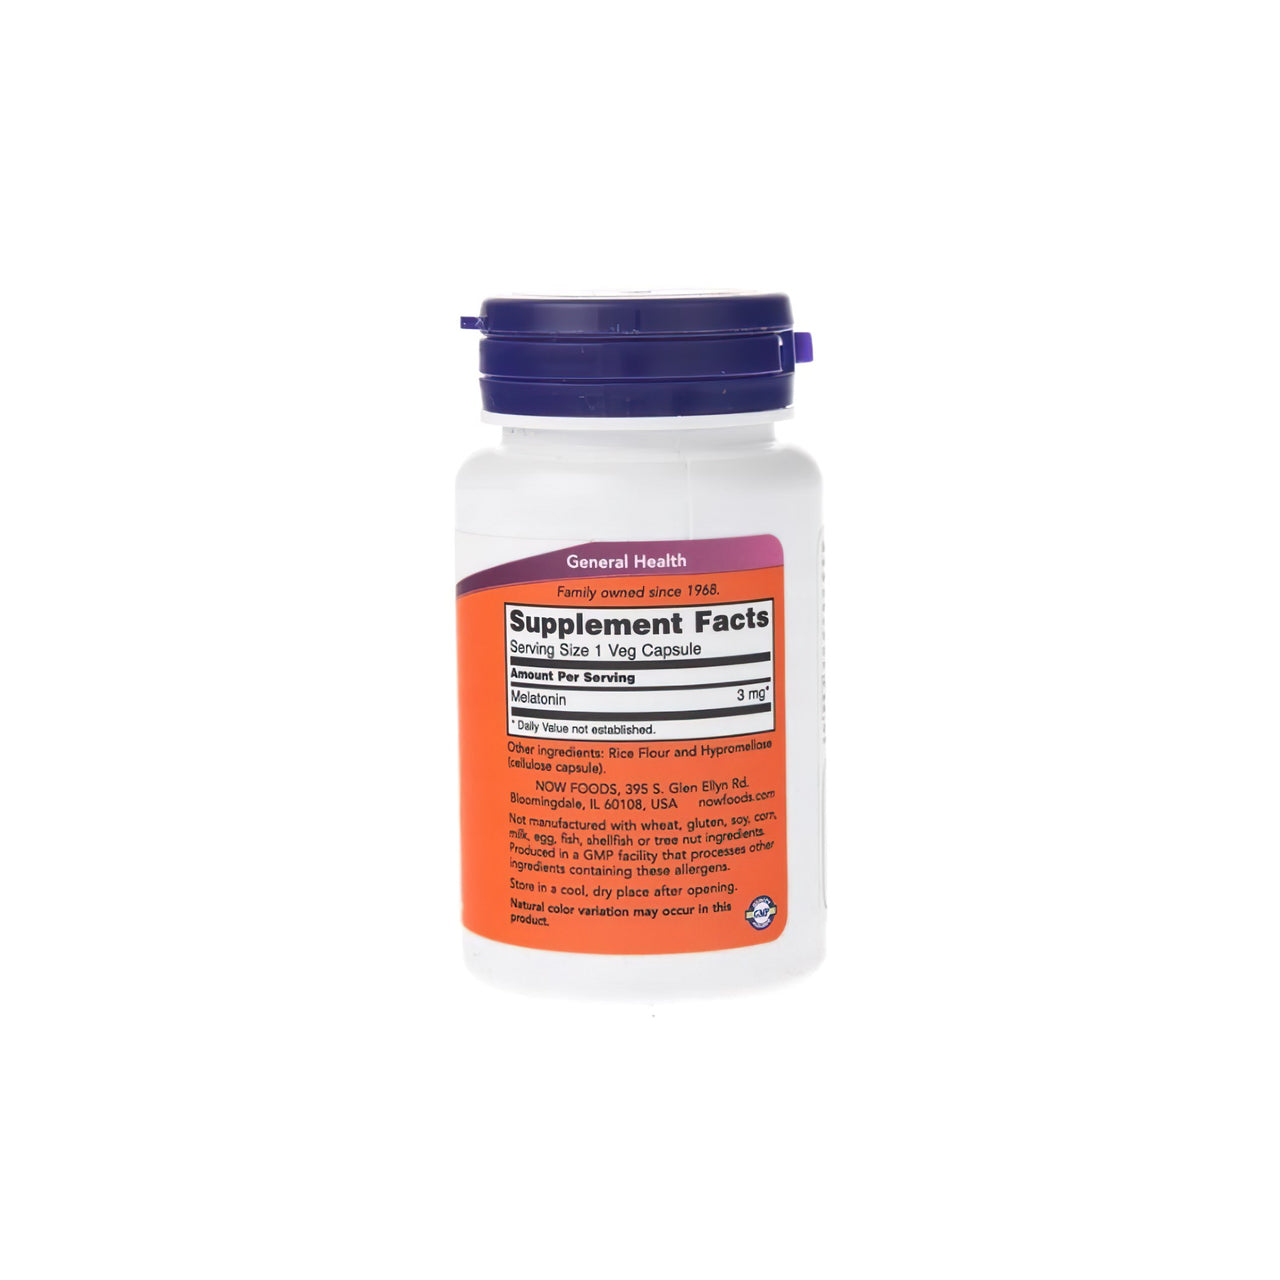 A bottle of Now Foods Melatonin 3 mg 180 vege capsules on a white background.